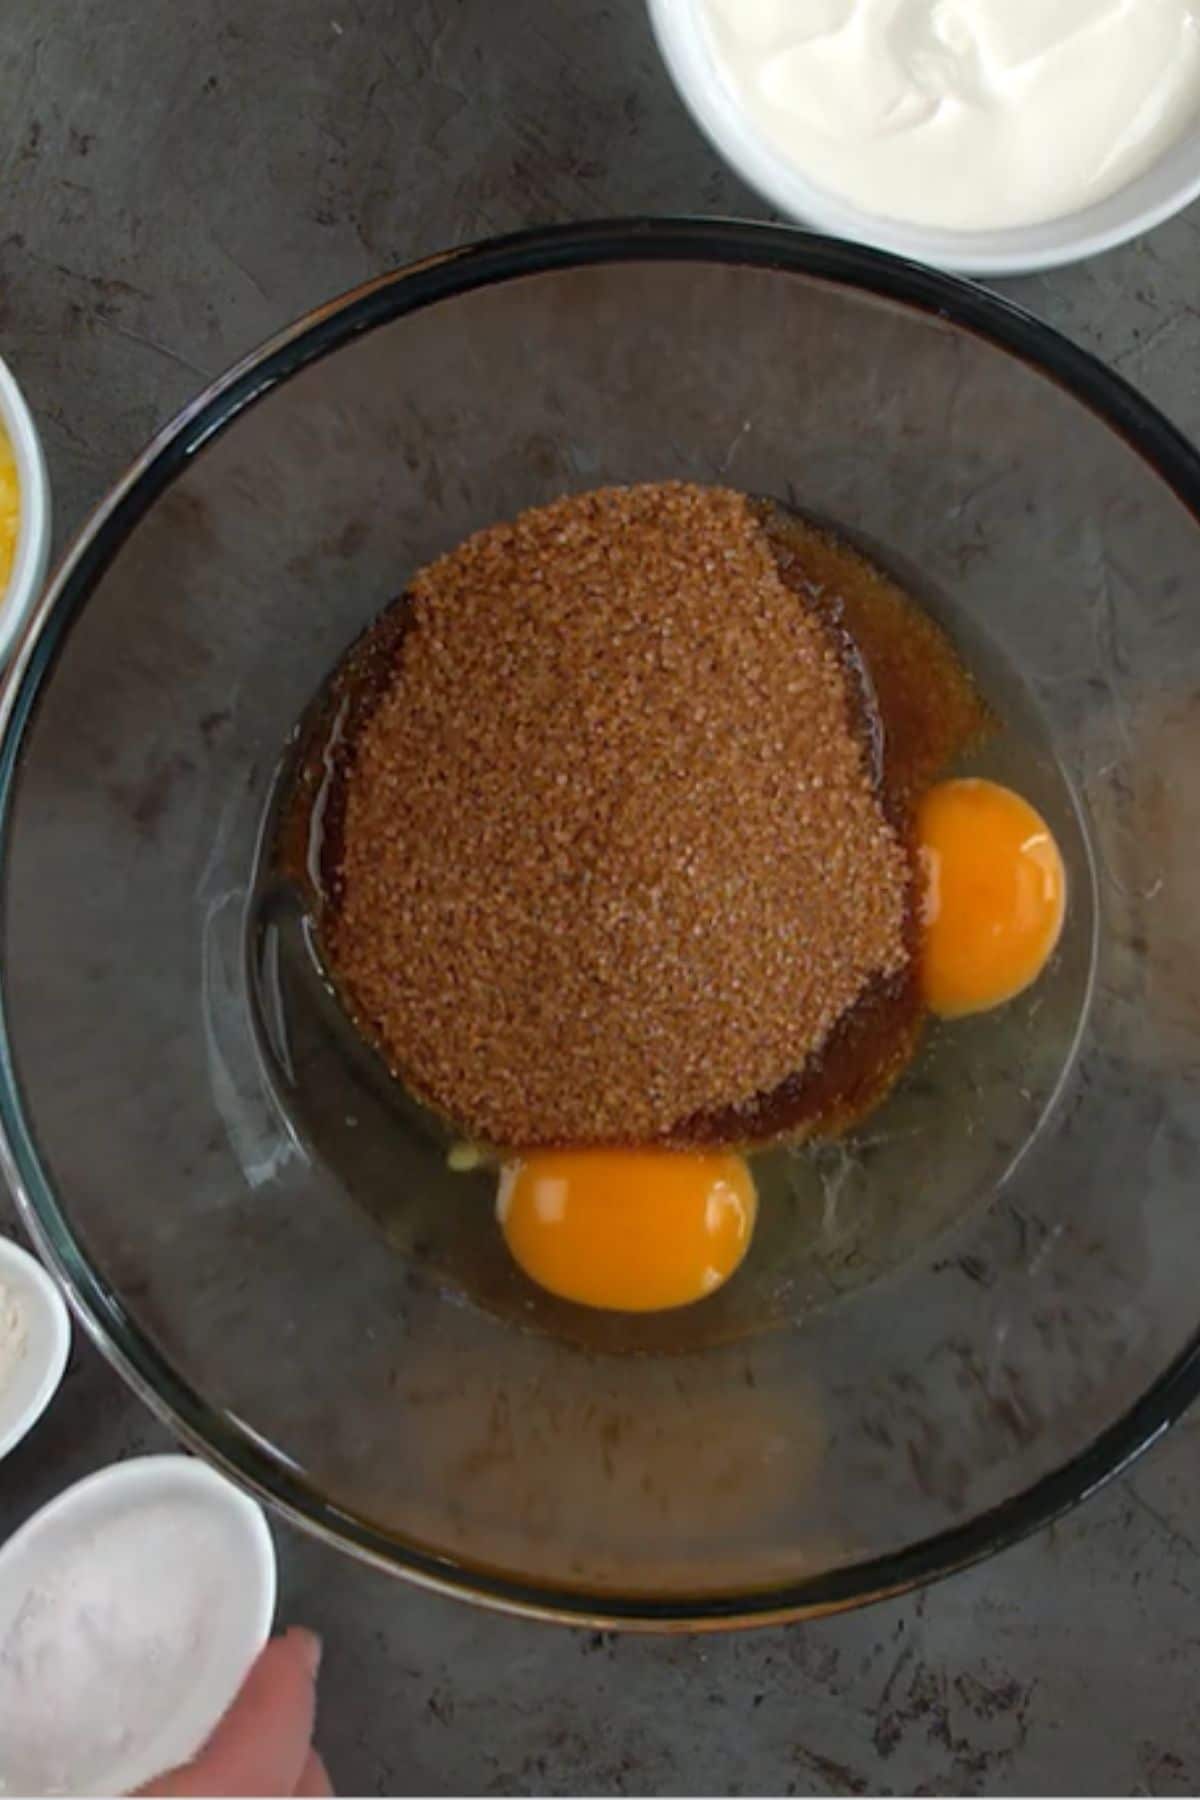 Eggs and sugar in bowl